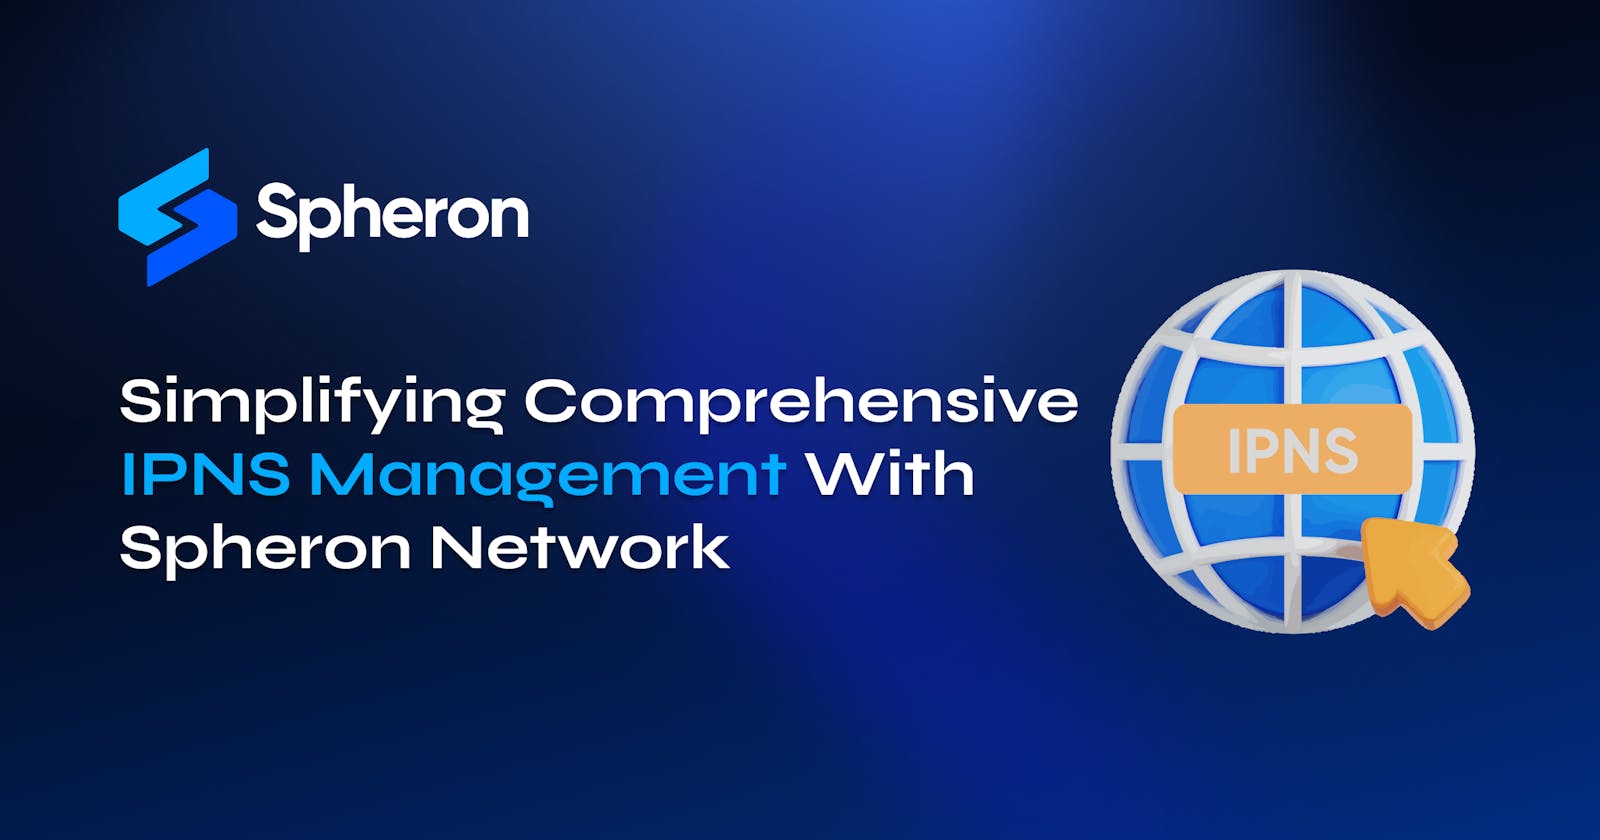 Simplifying Comprehensive IPNS Management With Spheron Network